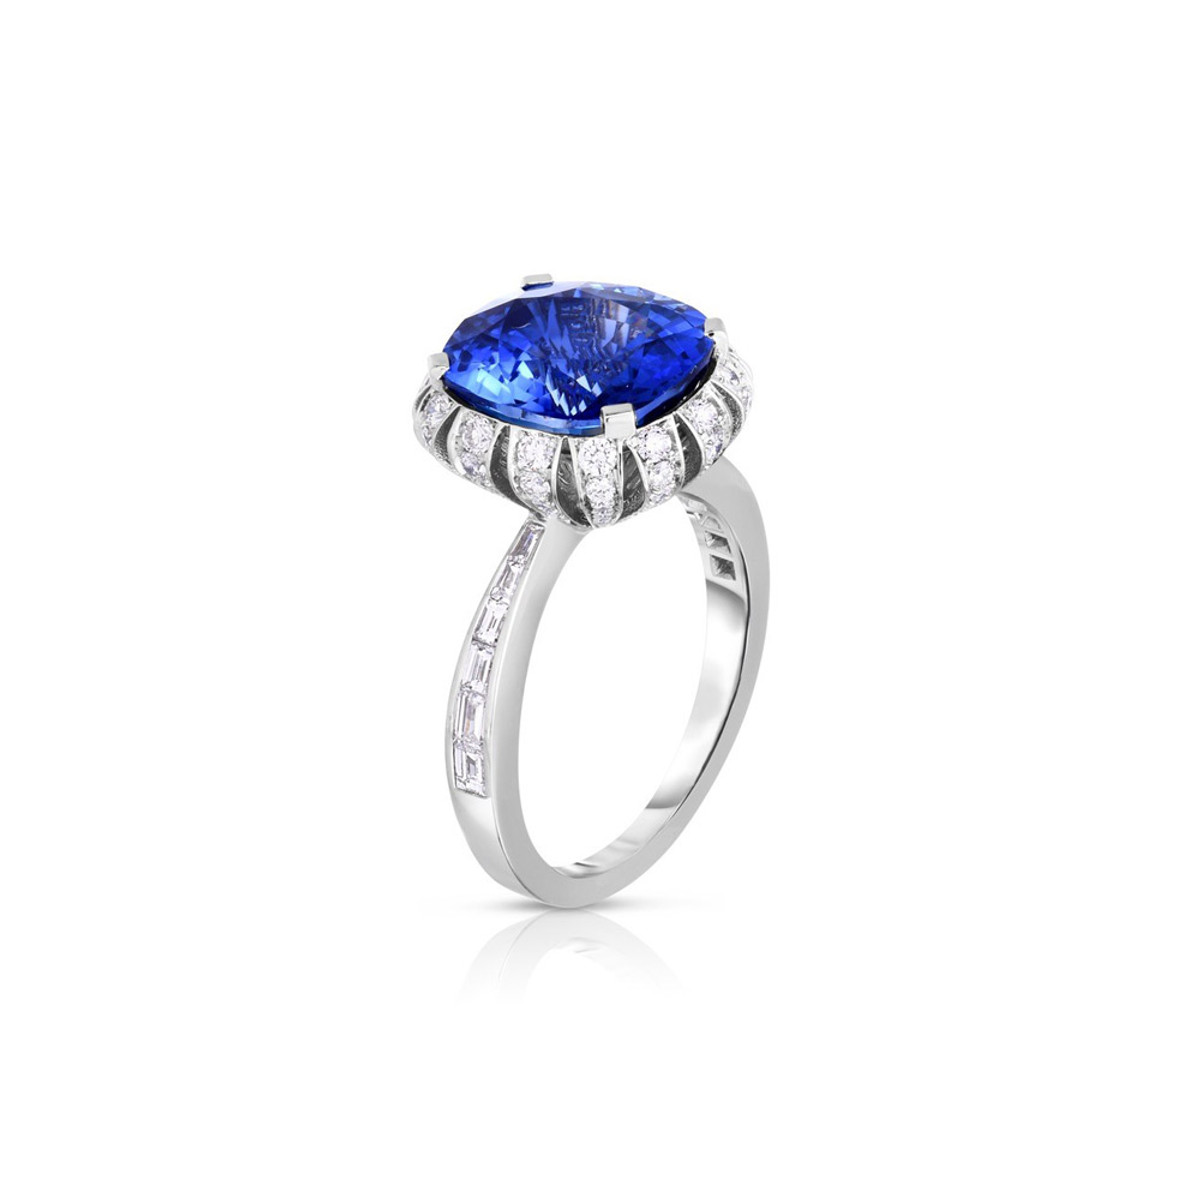 Hyde Park Collection Platinum Sapphire & Diamond Ring-54476 Product Image